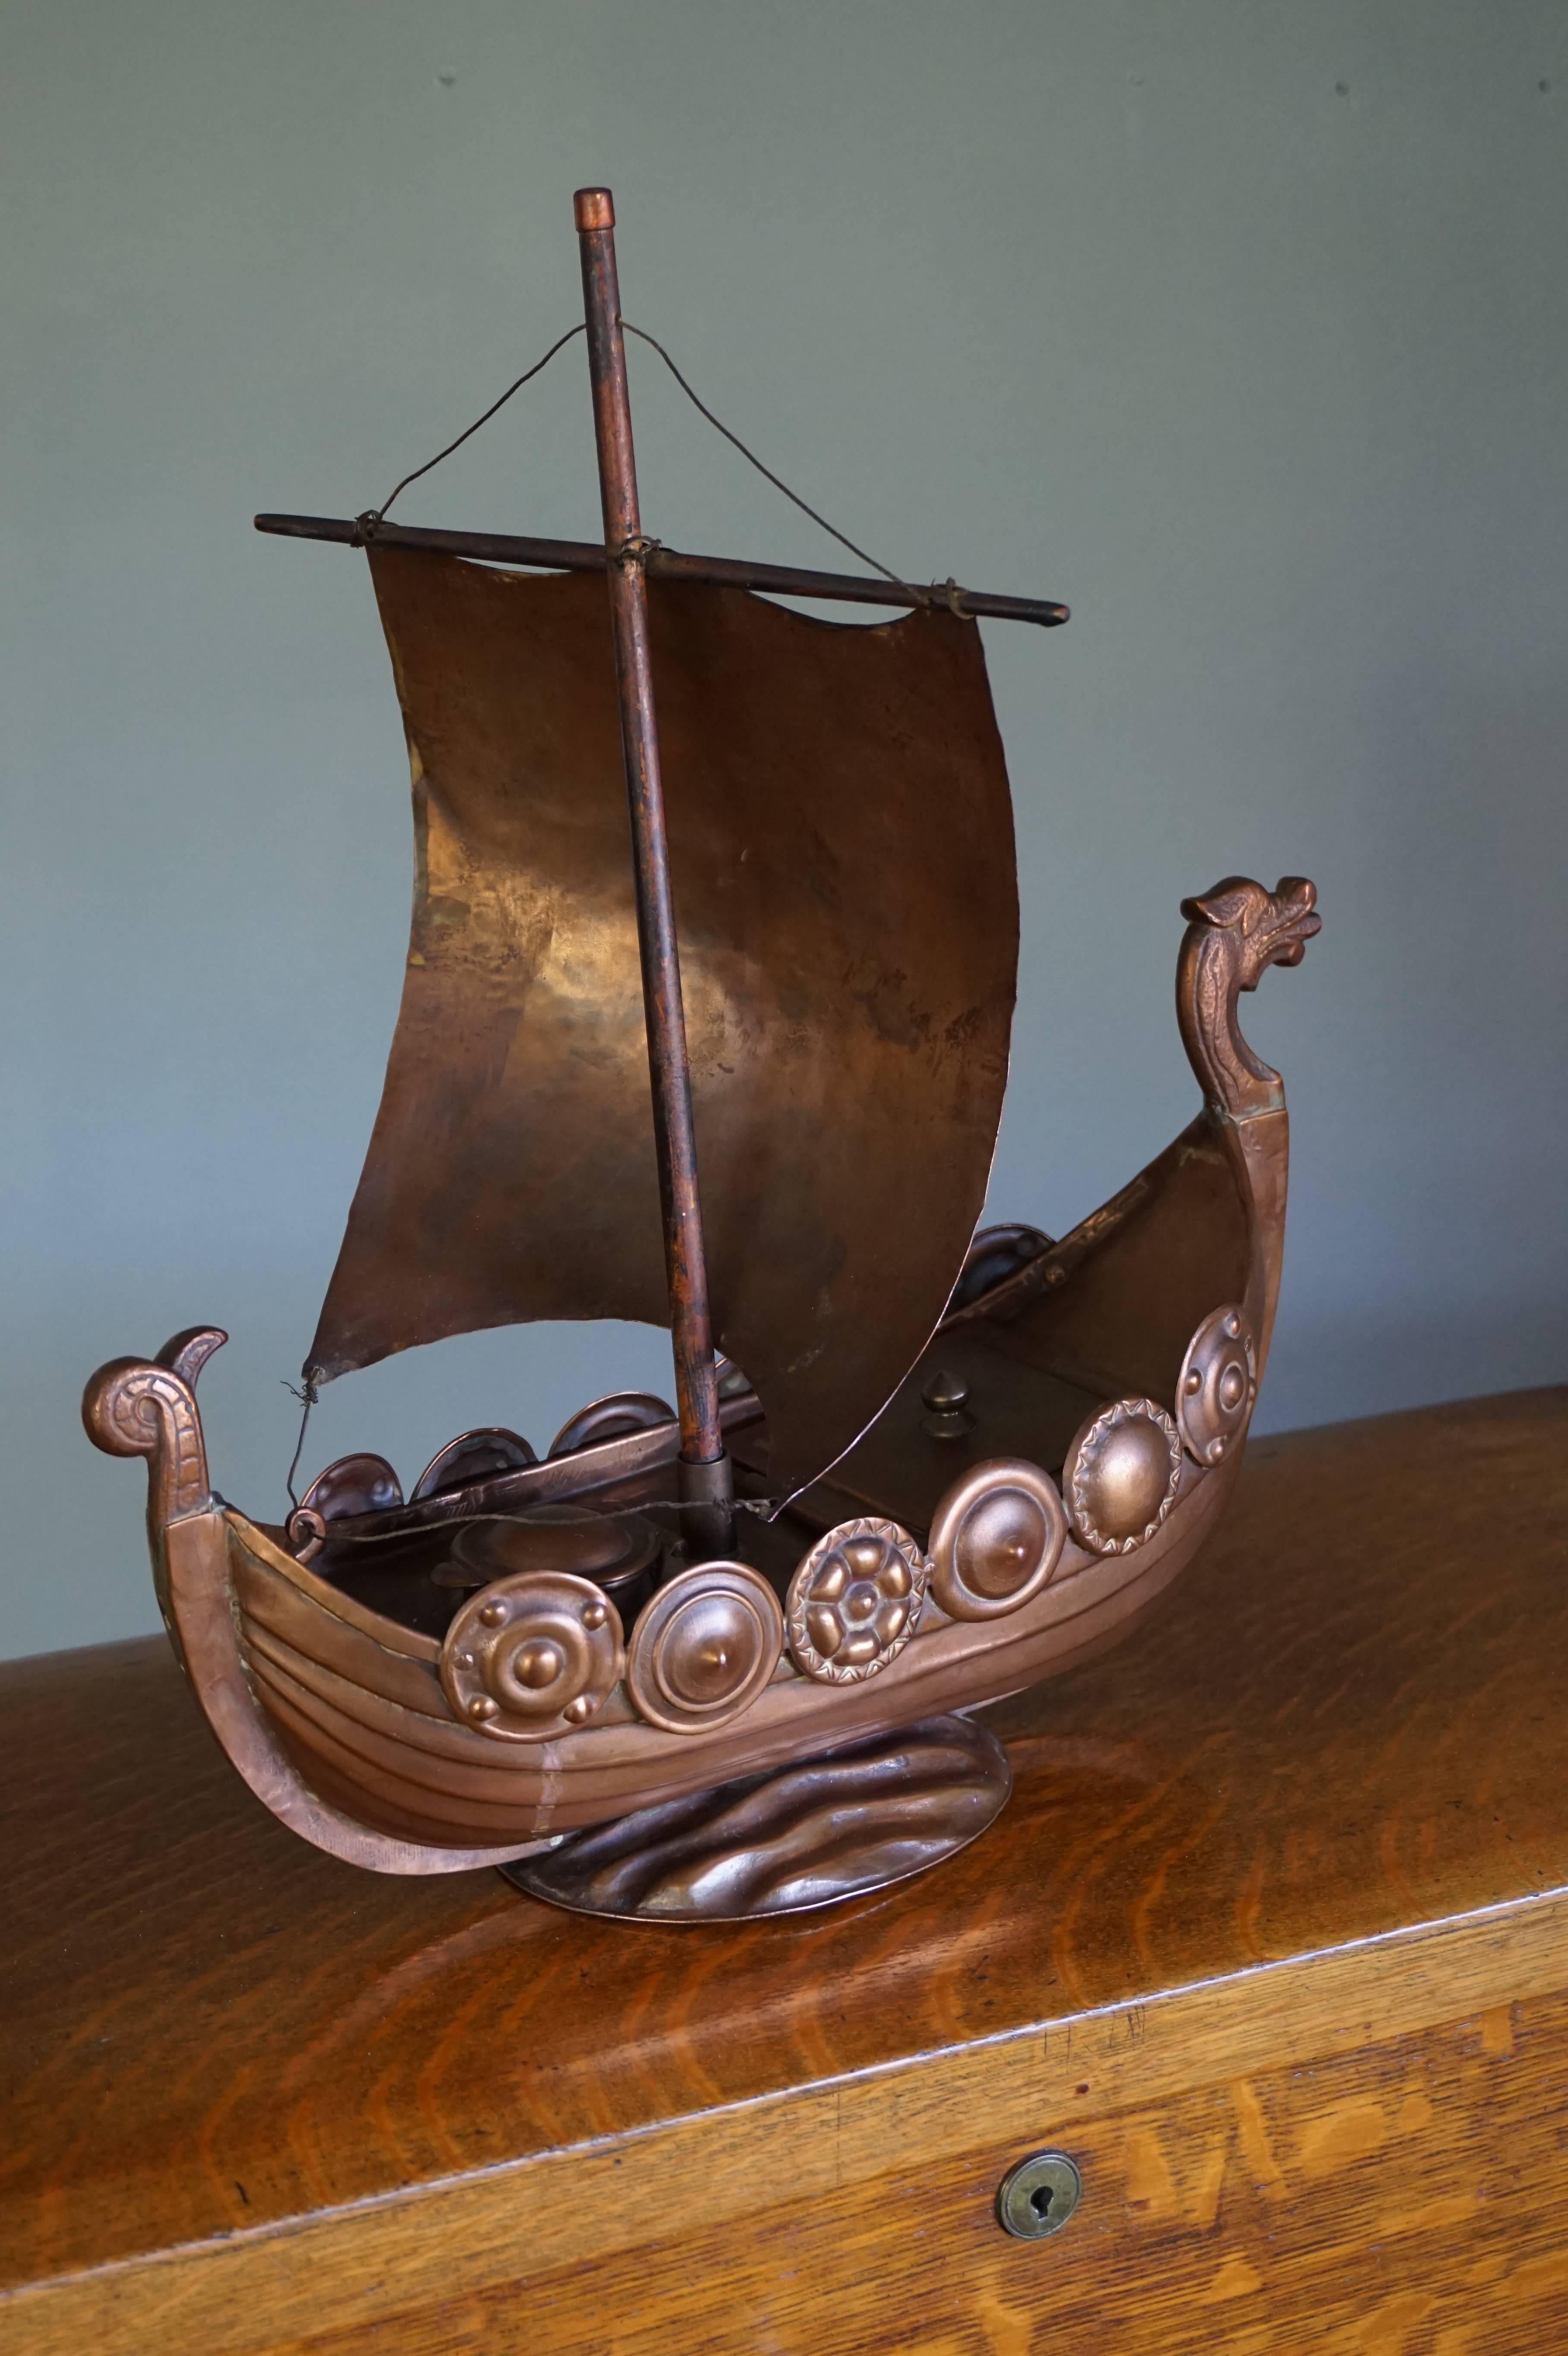 European Unique Folk Art Copper Viking Ship Table Piece with Shields and Boxes on Deck For Sale